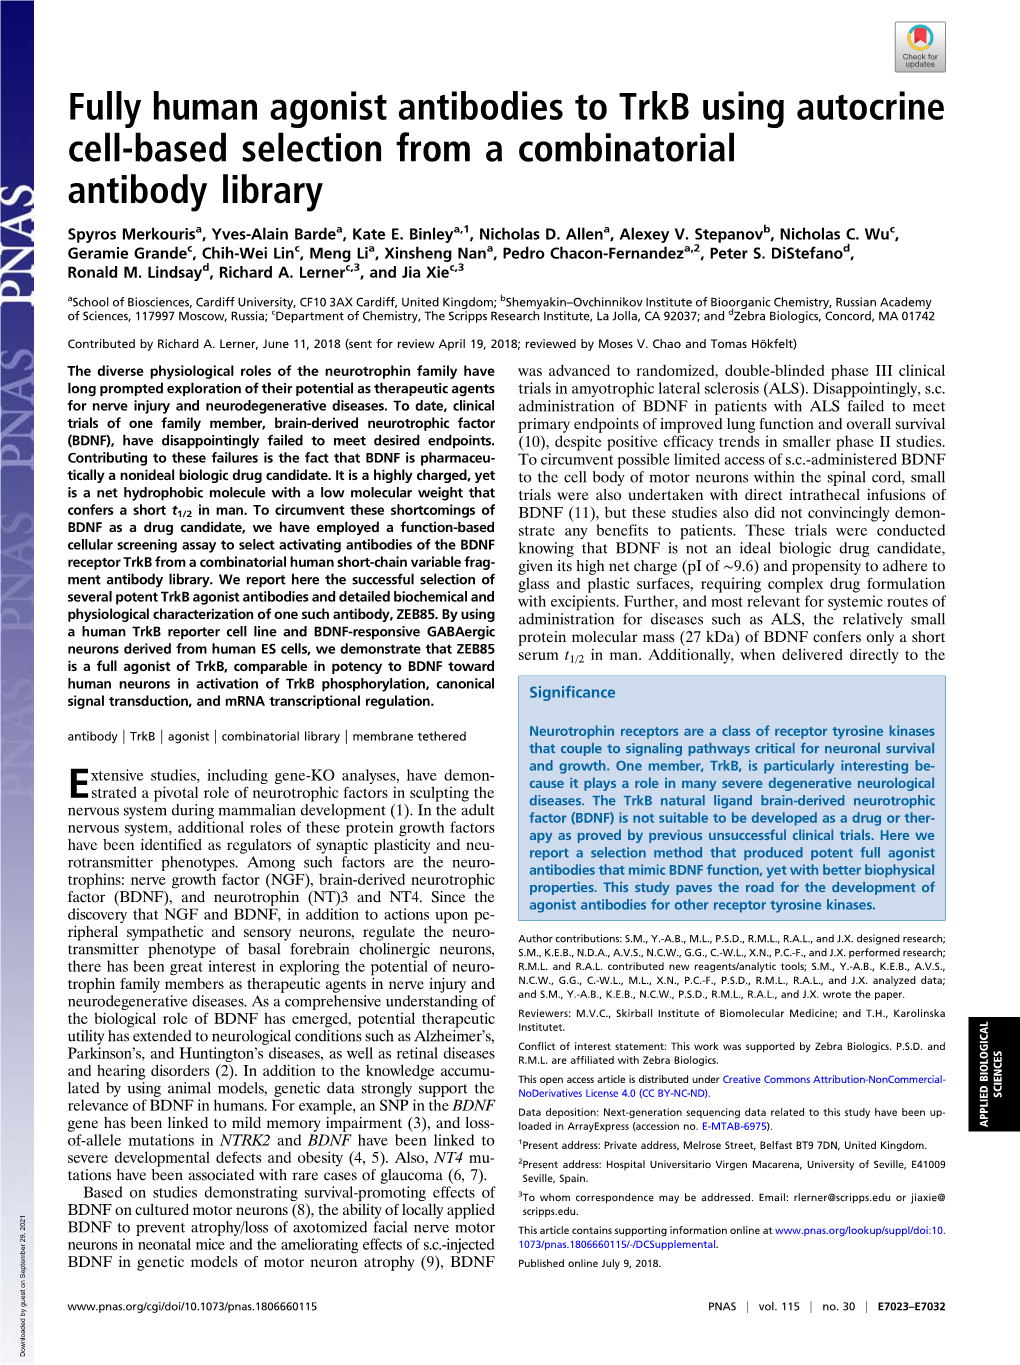 Fully Human Agonist Antibodies to Trkb Using Autocrine Cell-Based Selection from a Combinatorial Antibody Library